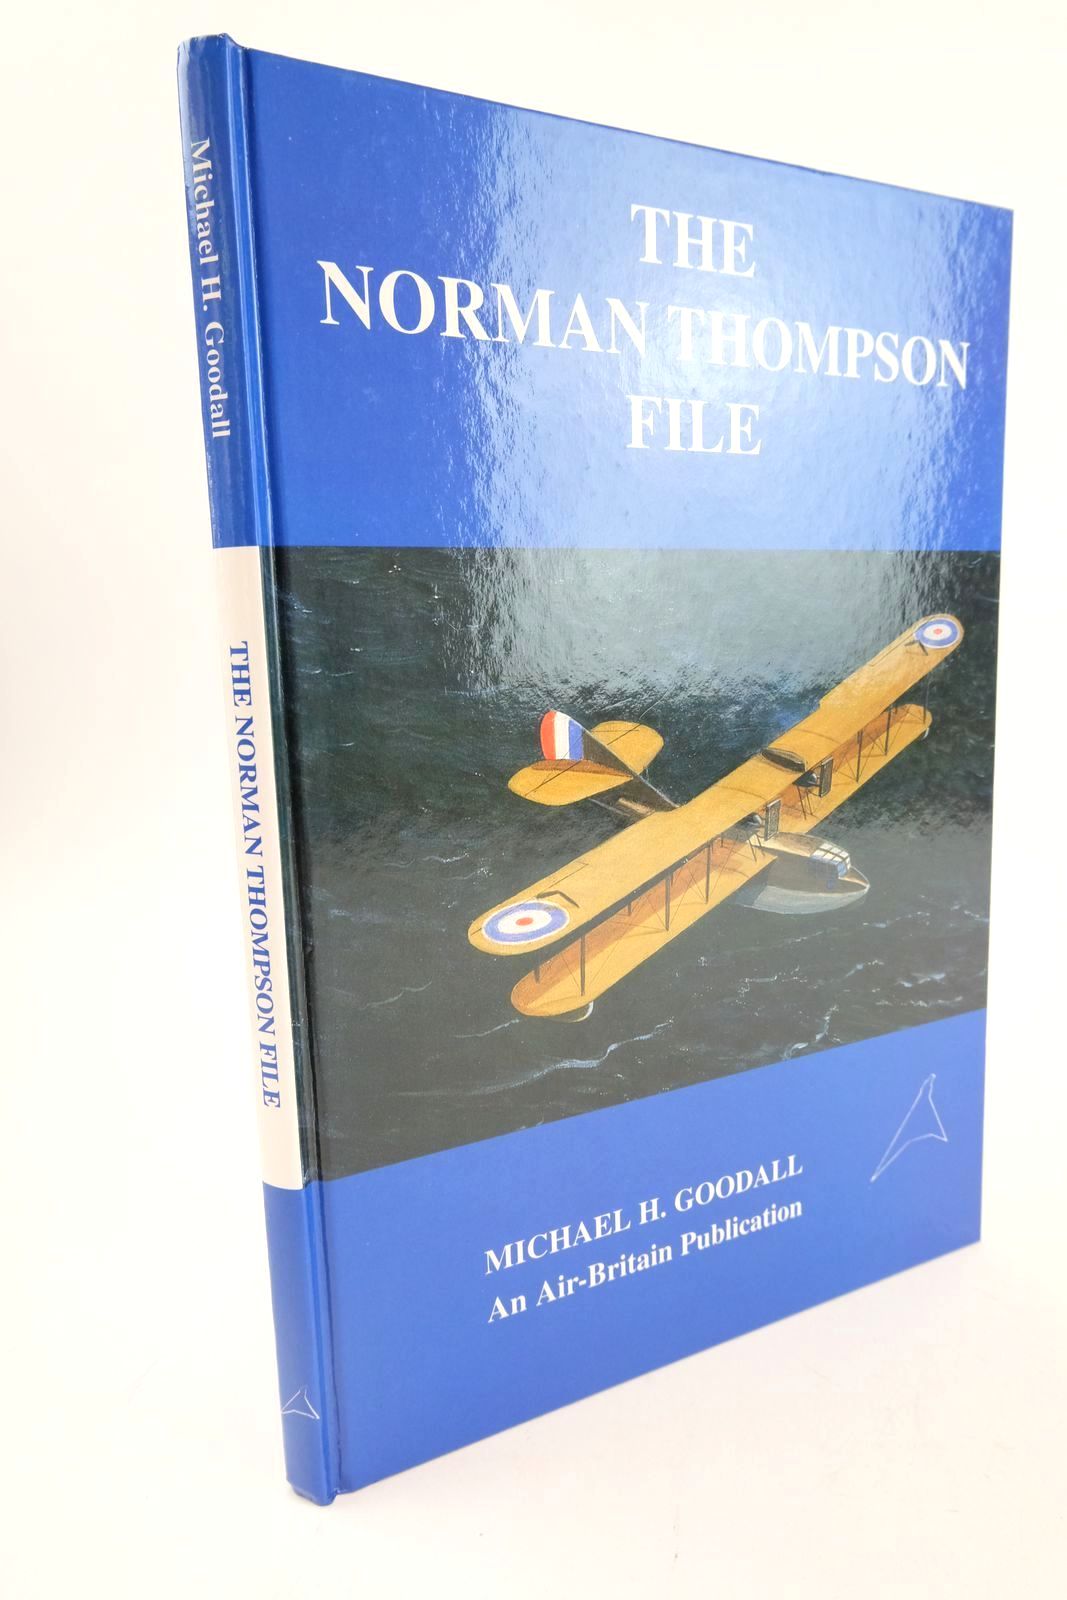 Photo of THE NORMAN THOMPSON FILE written by Goodall, Michael H. published by Air-Britain (STOCK CODE: 1325203)  for sale by Stella & Rose's Books